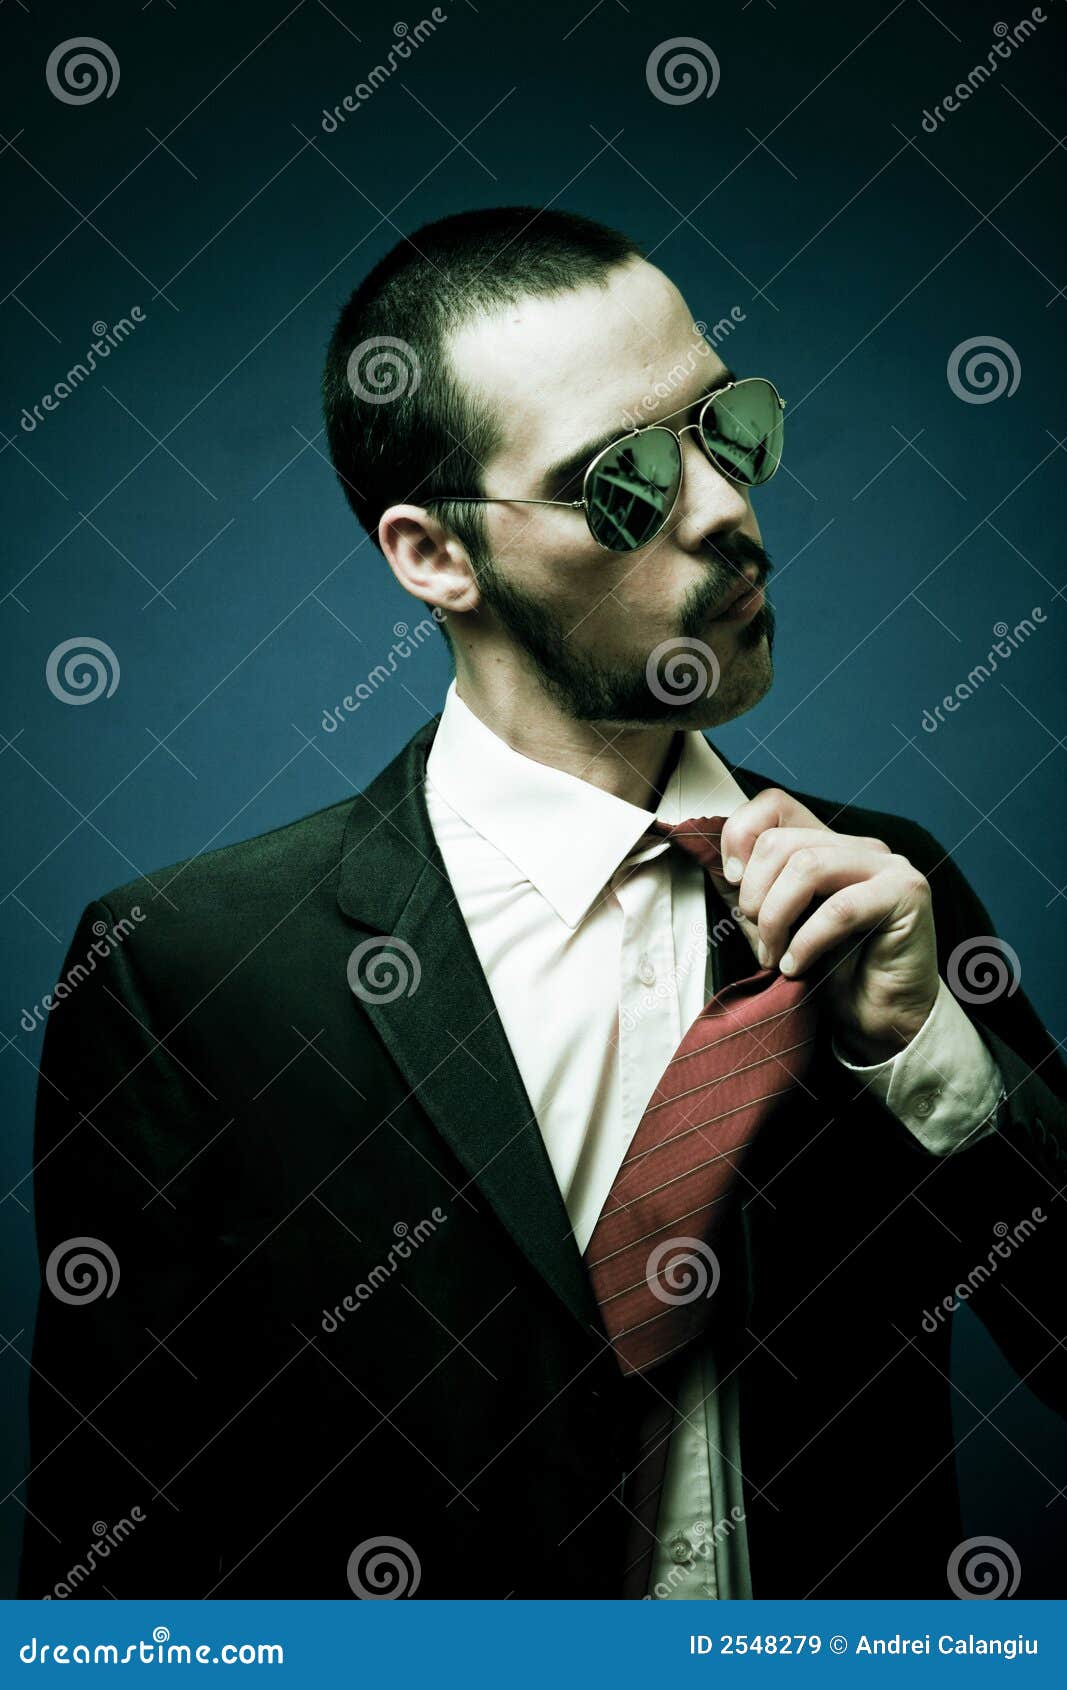 man with shades